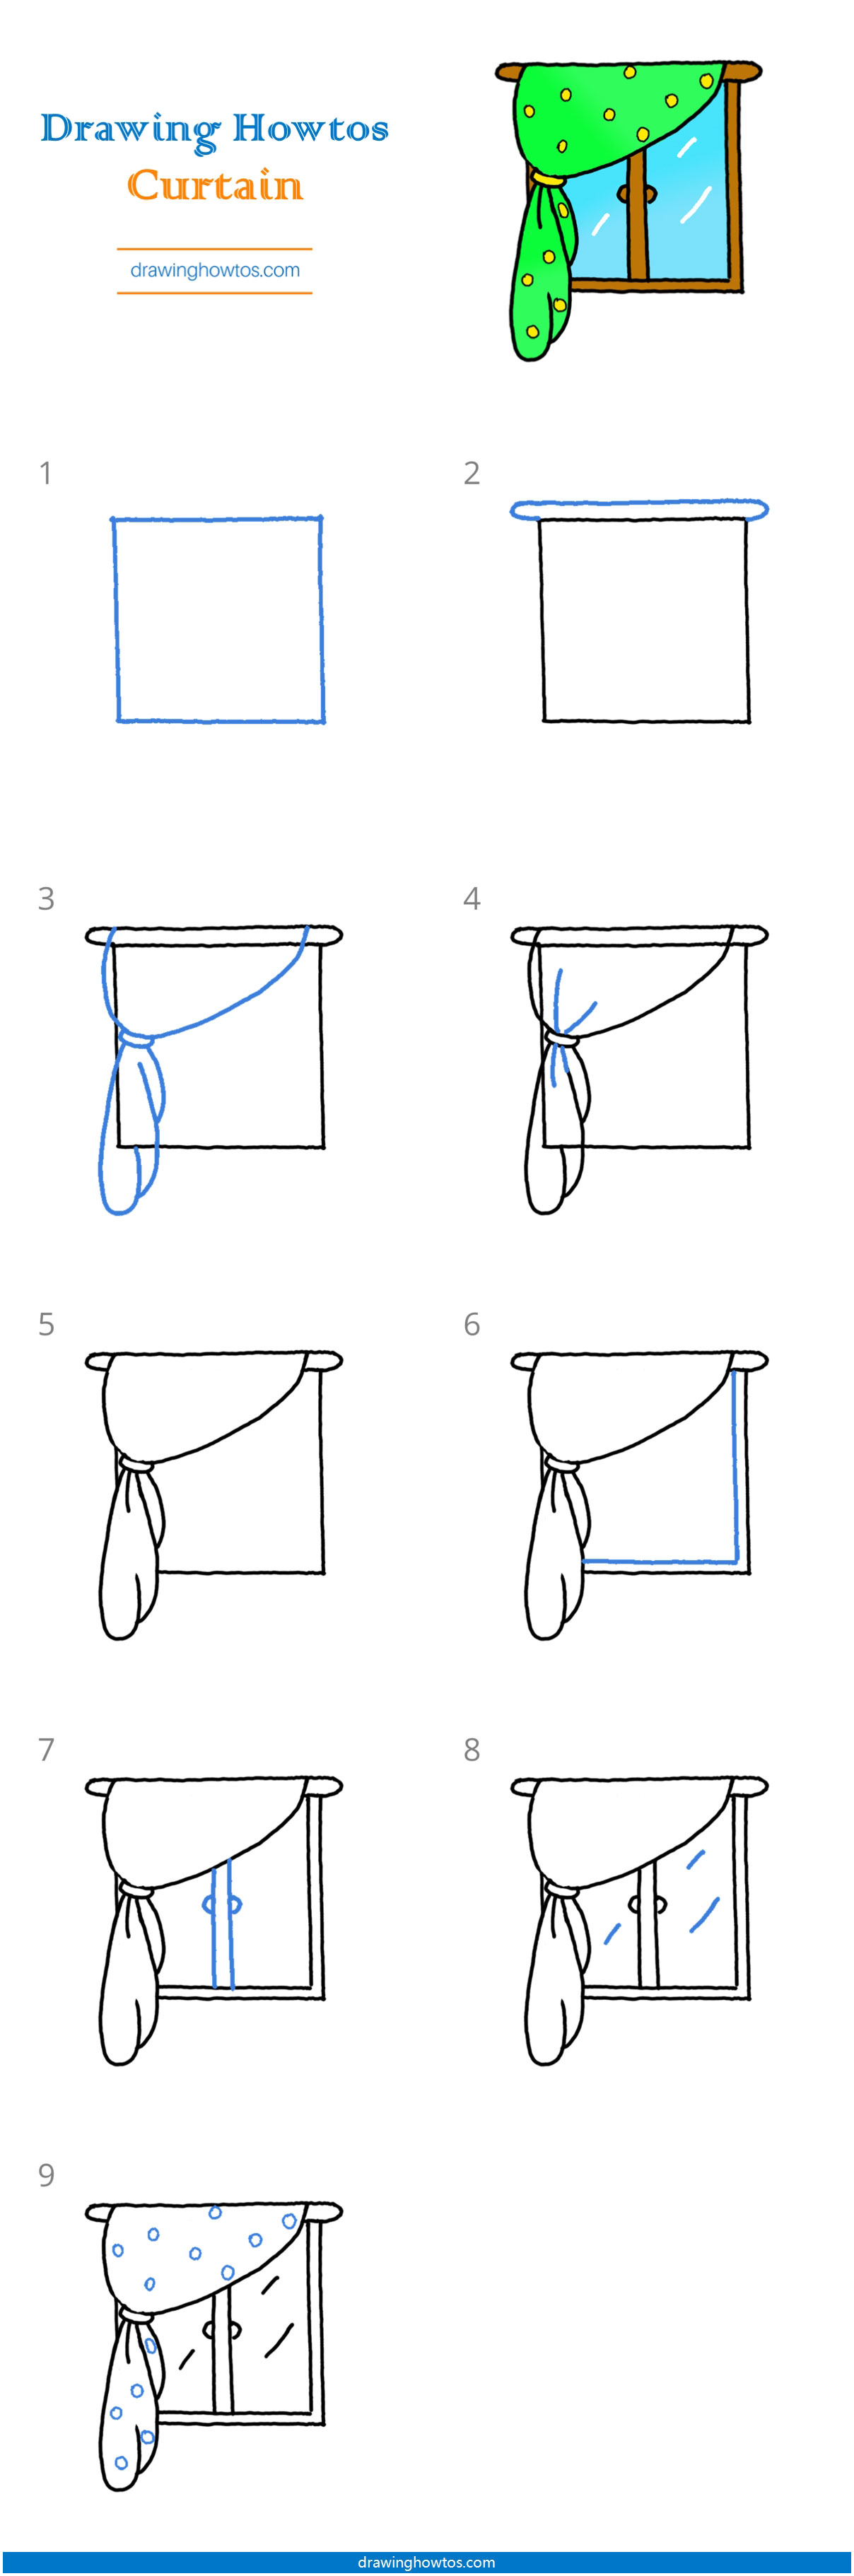 How to Draw a Curtain Step by Step